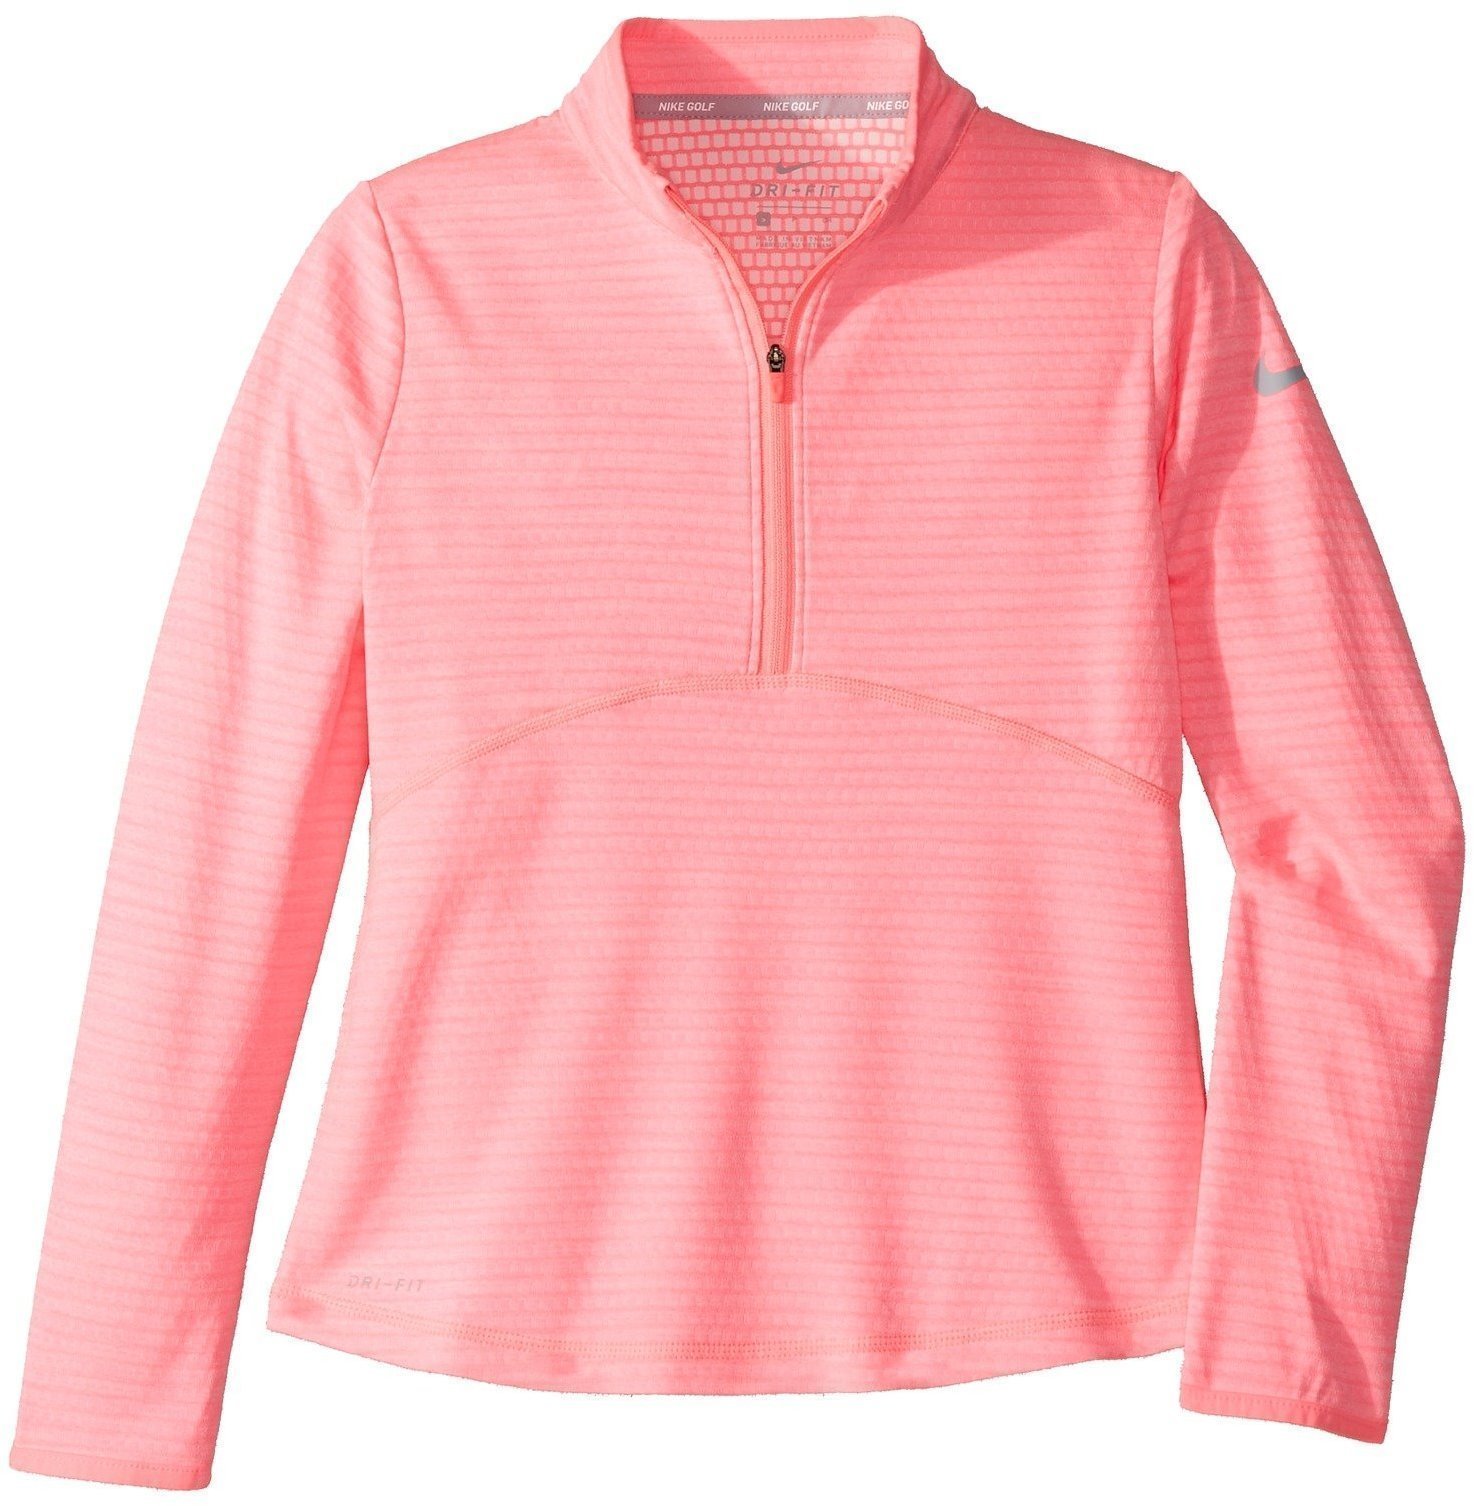 Sudadera con capucha/Suéter Nike Girls Dry Long Sleeve Top Sunset Pulse/Flt Silver S